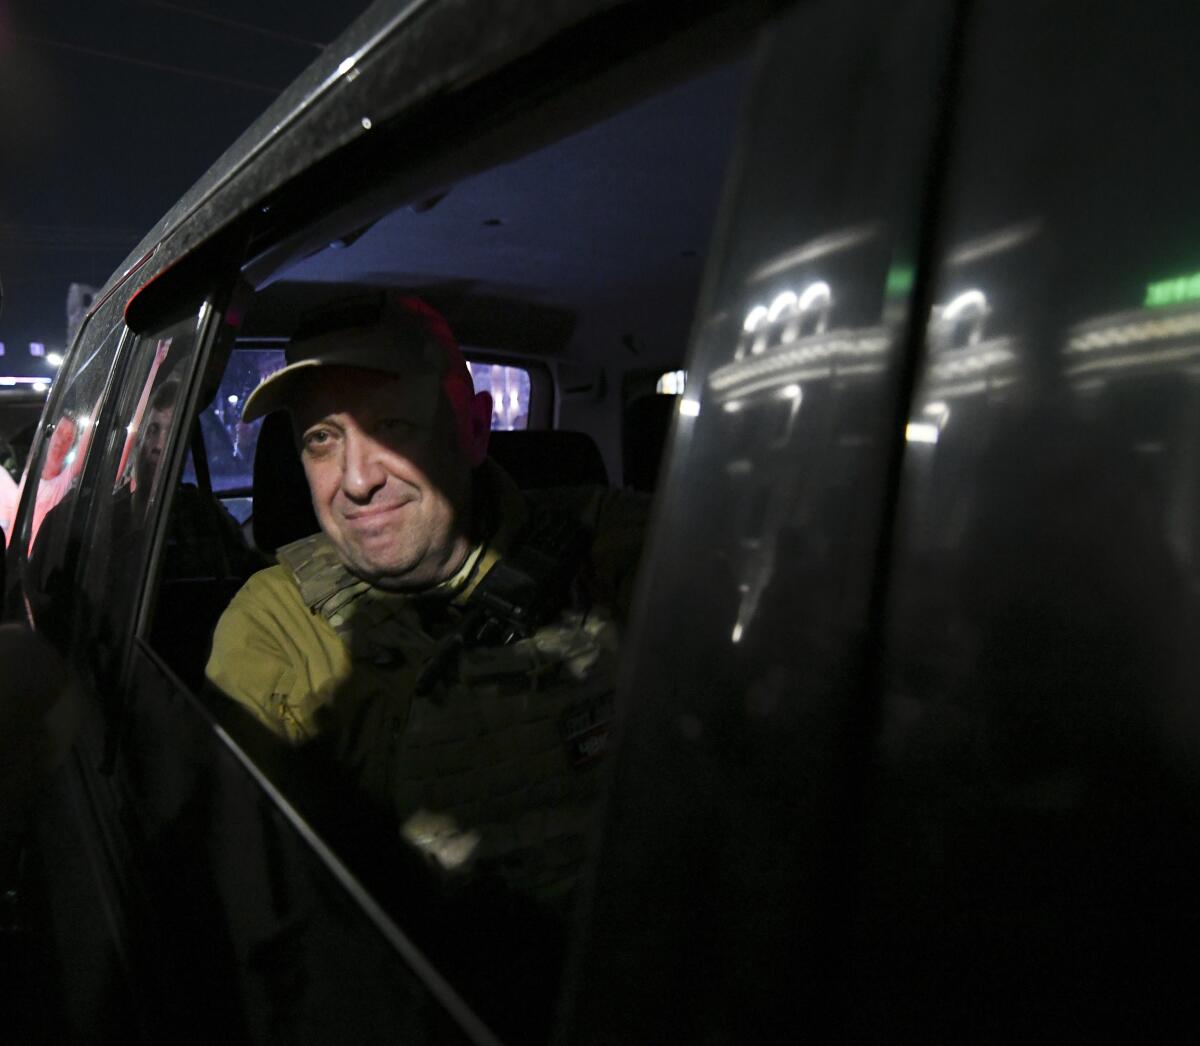 Head of the Wagner Group Yevgeny Prigozhin leaving the Southern Military District headquarters.